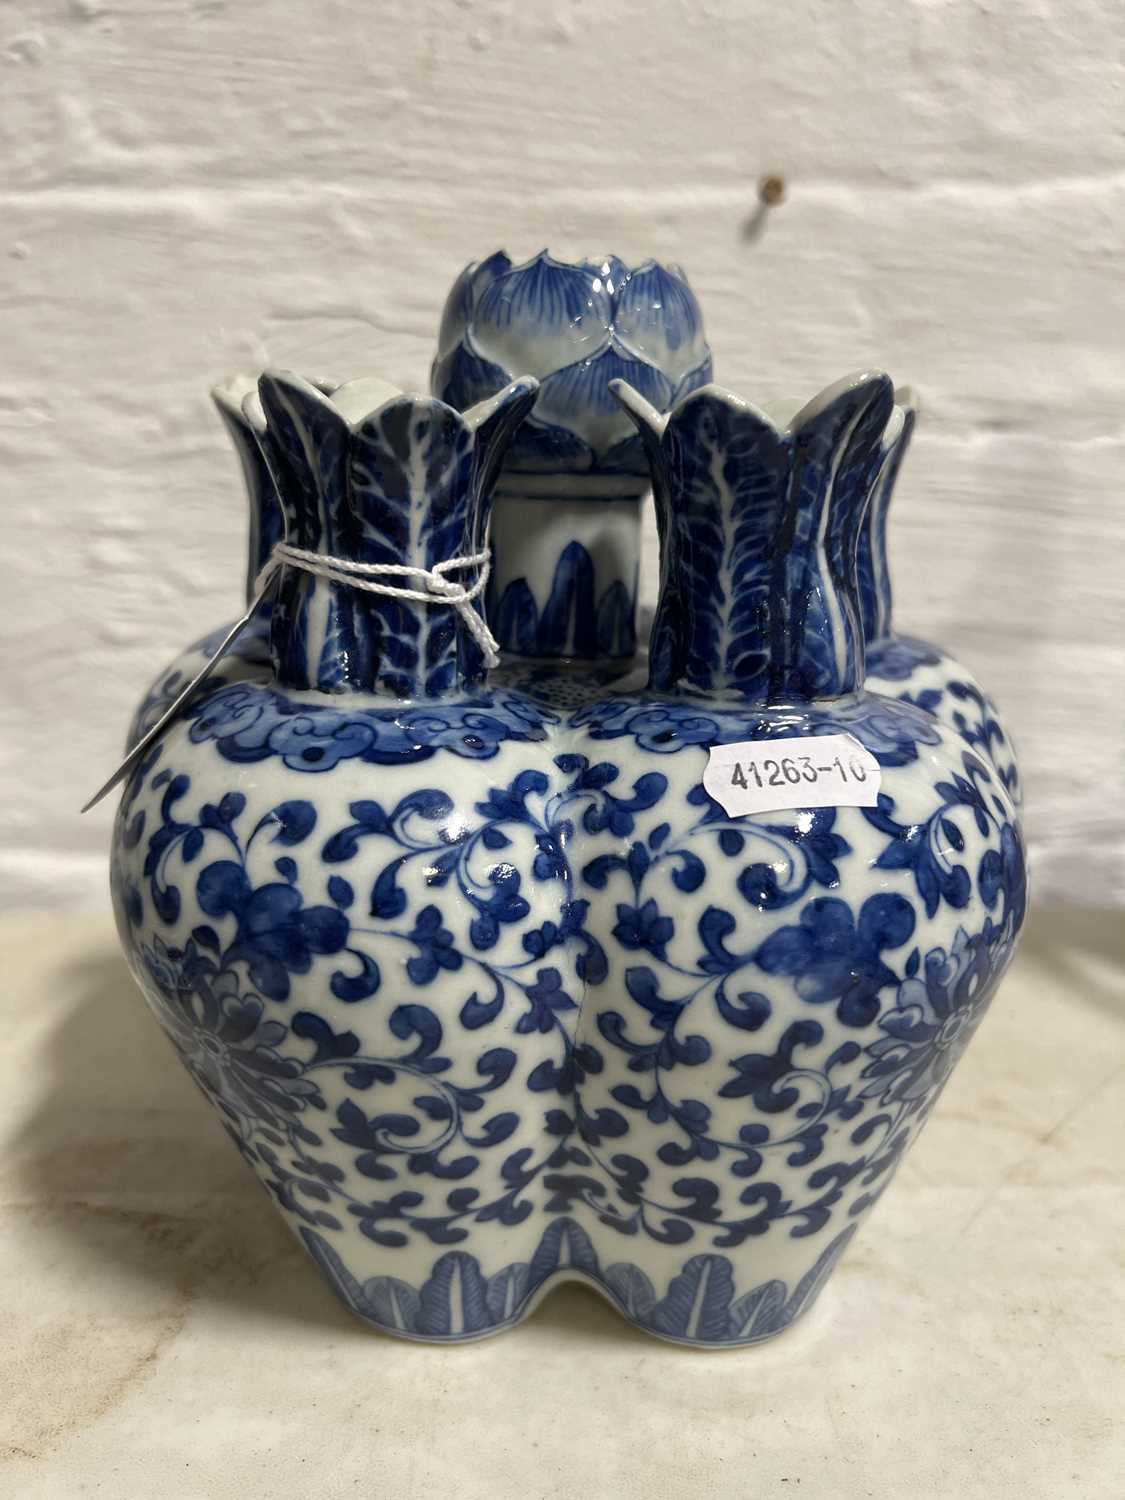 Chinese porcelain blue and white tulip or bulb vase, 19th century - Image 5 of 9